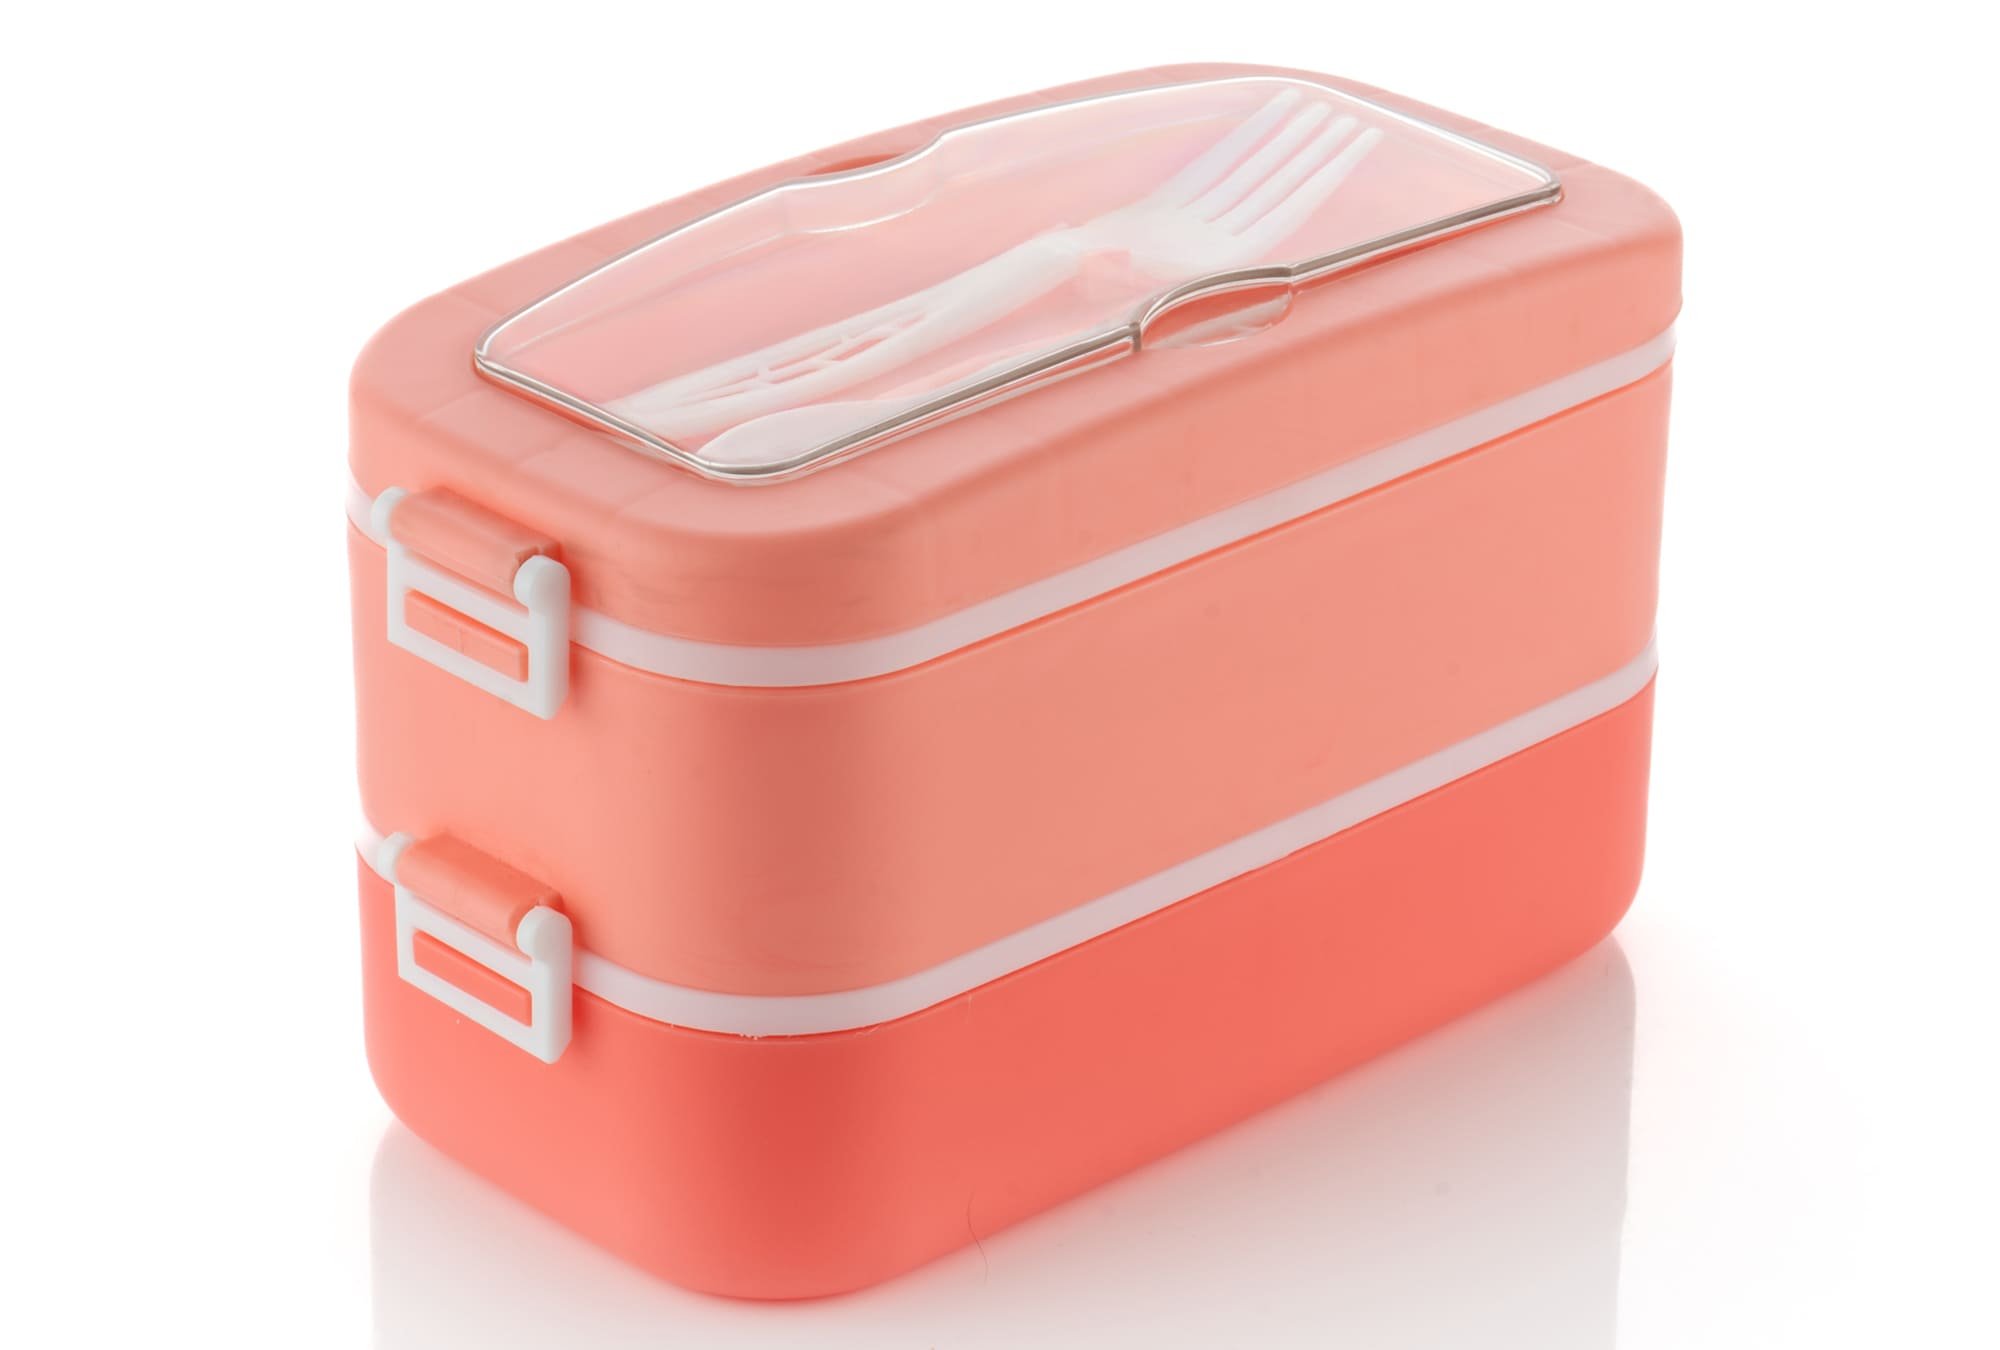 Cronus Exclusive Bento Plastic LunchBox with Spoon and Fork for School,Office & College 2 Containers Lunch Box  (1400 ml)